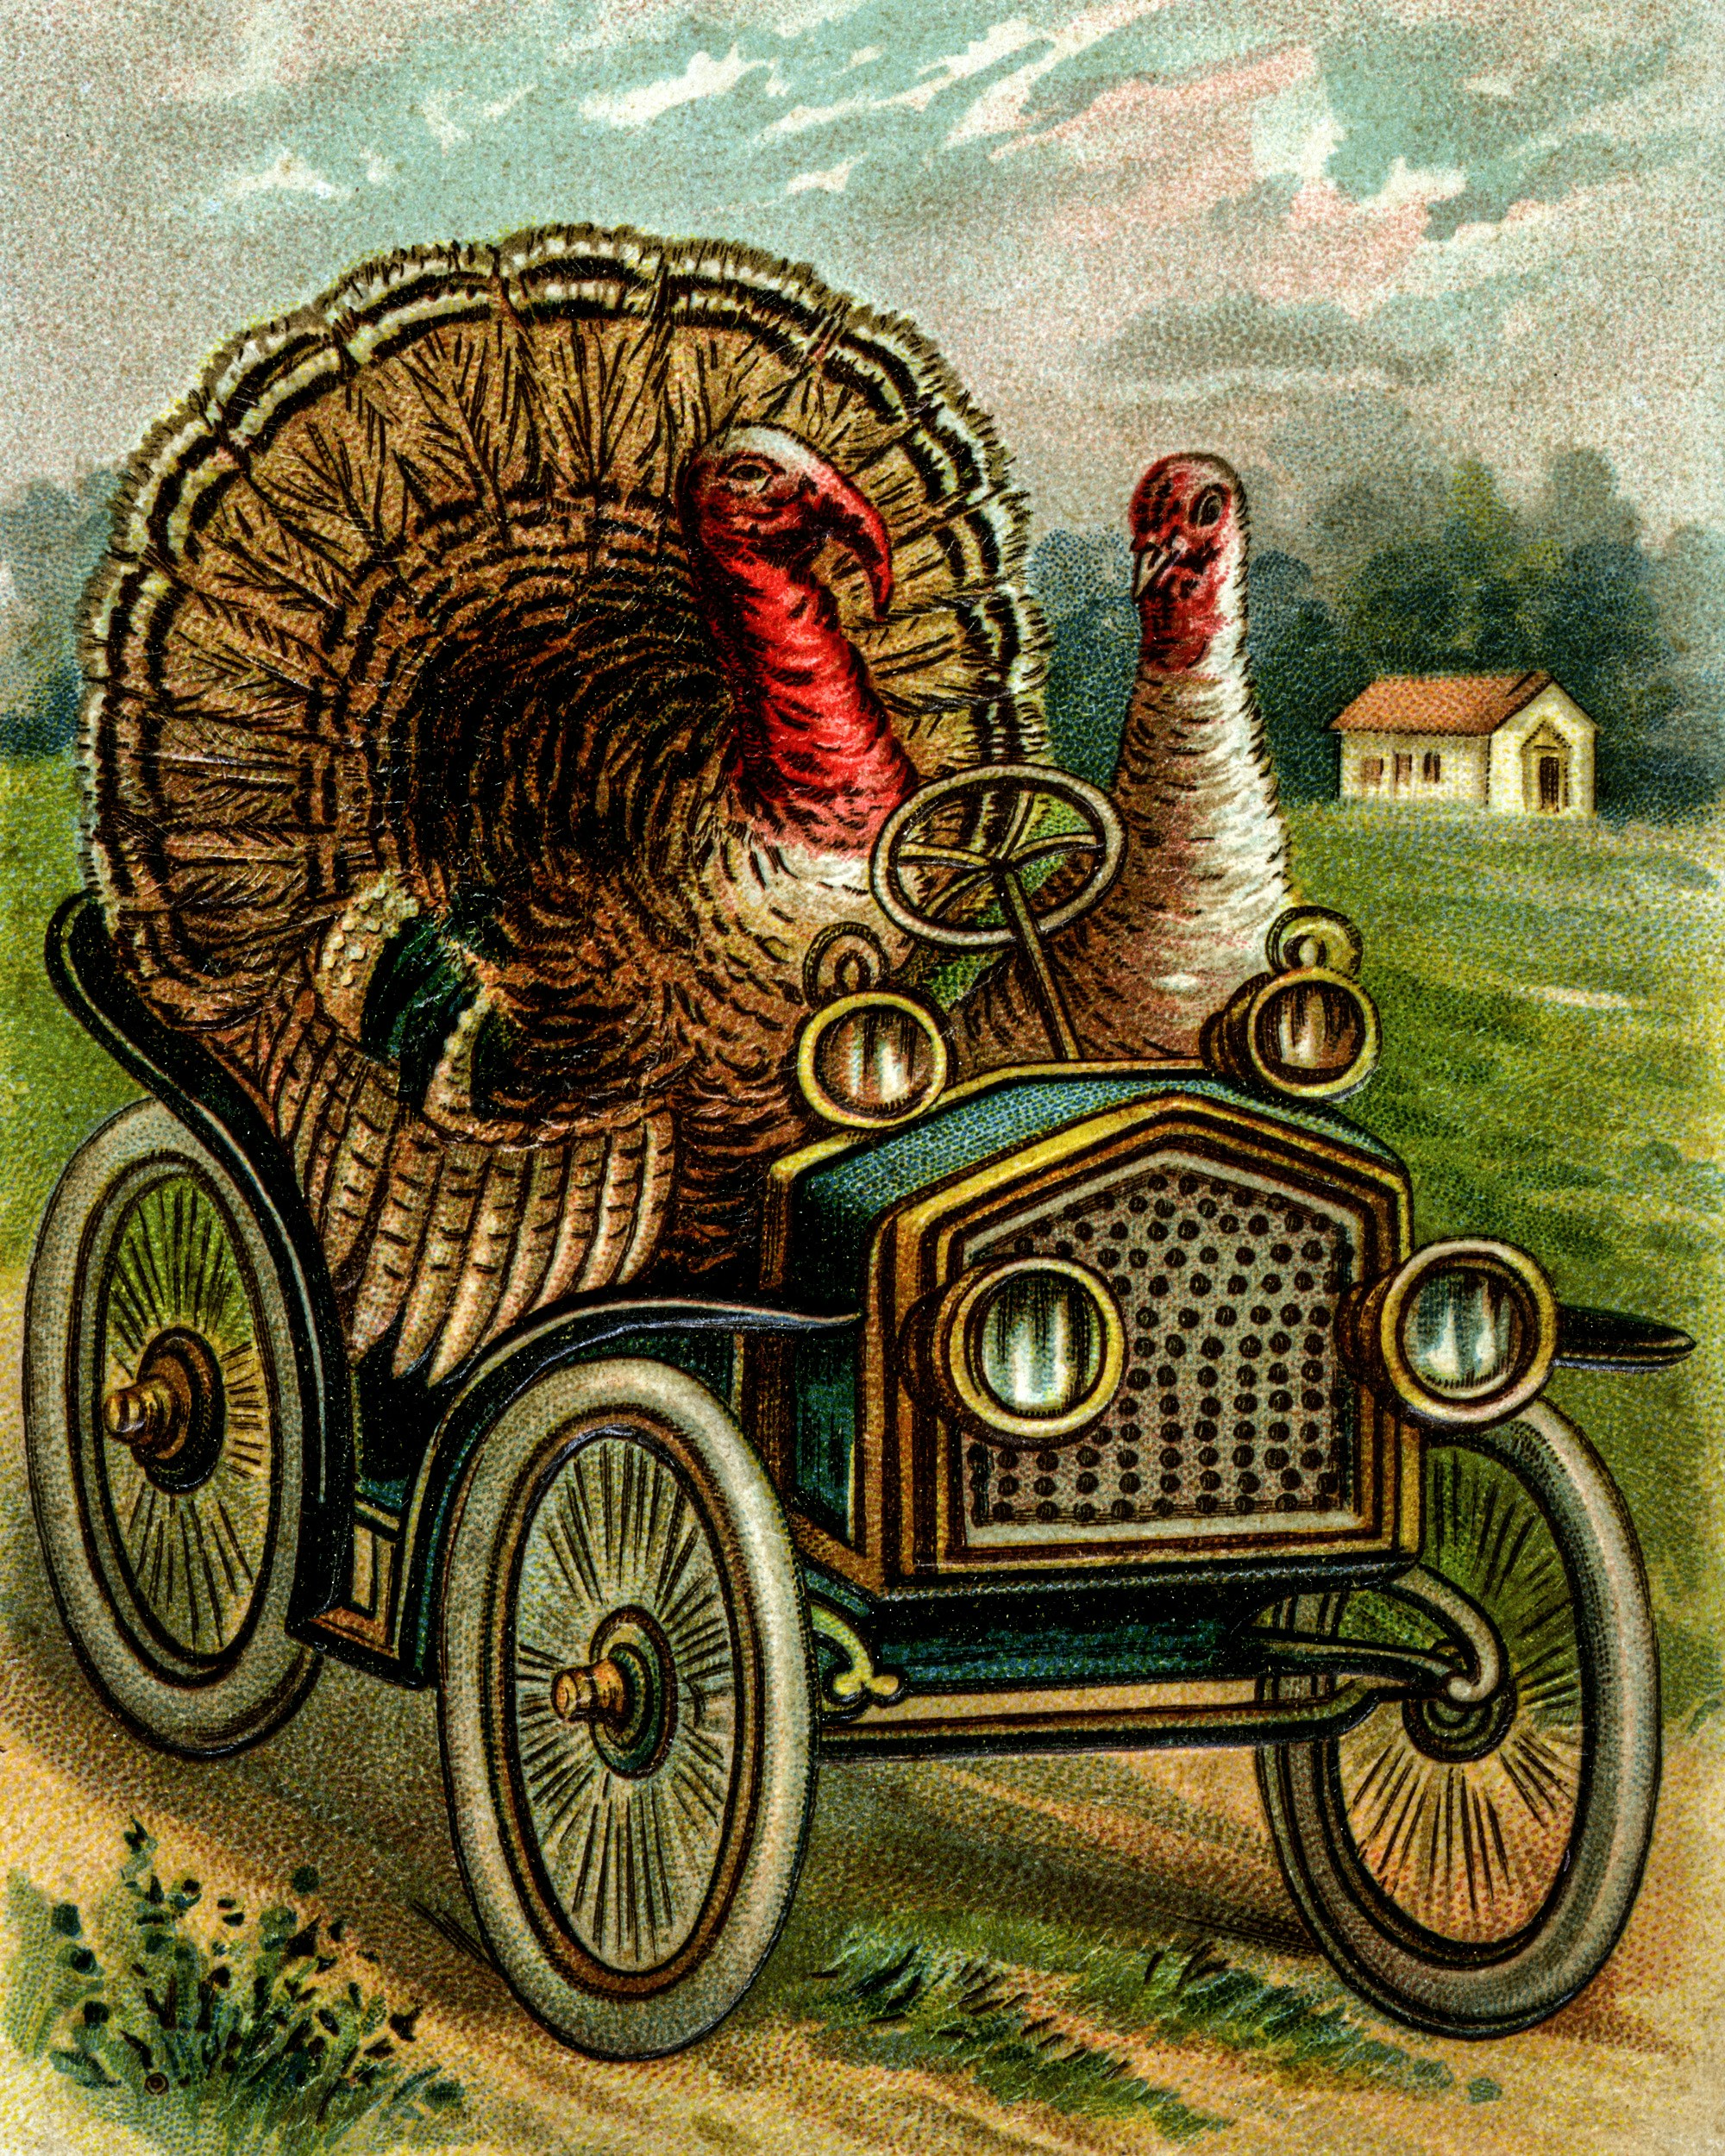 UNITED STATES - 1900: Two turkeys drive off on Sunday, hardly!  Chances are these guys know what's coming and are leaving town in their classic cars.  The person sending the vintage postcard is the person conveying their Thanksgiving wishes because the turkey probably won't enjoy the holiday all that much.  (Photo by Buyenlarge/Getty Images)